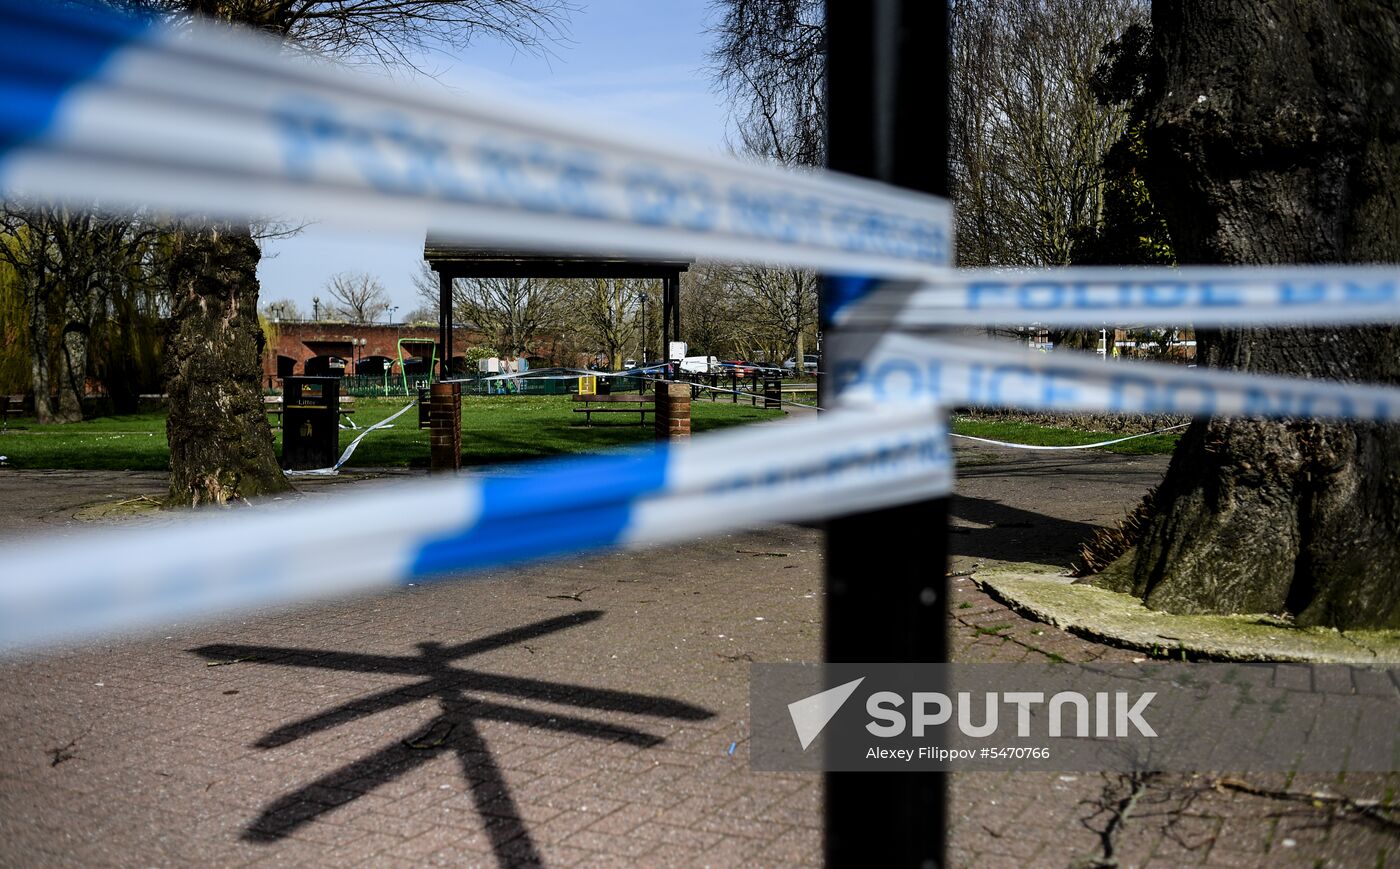 Salisbury in the UK, where Sergei Skripal and his daughter were poisoned